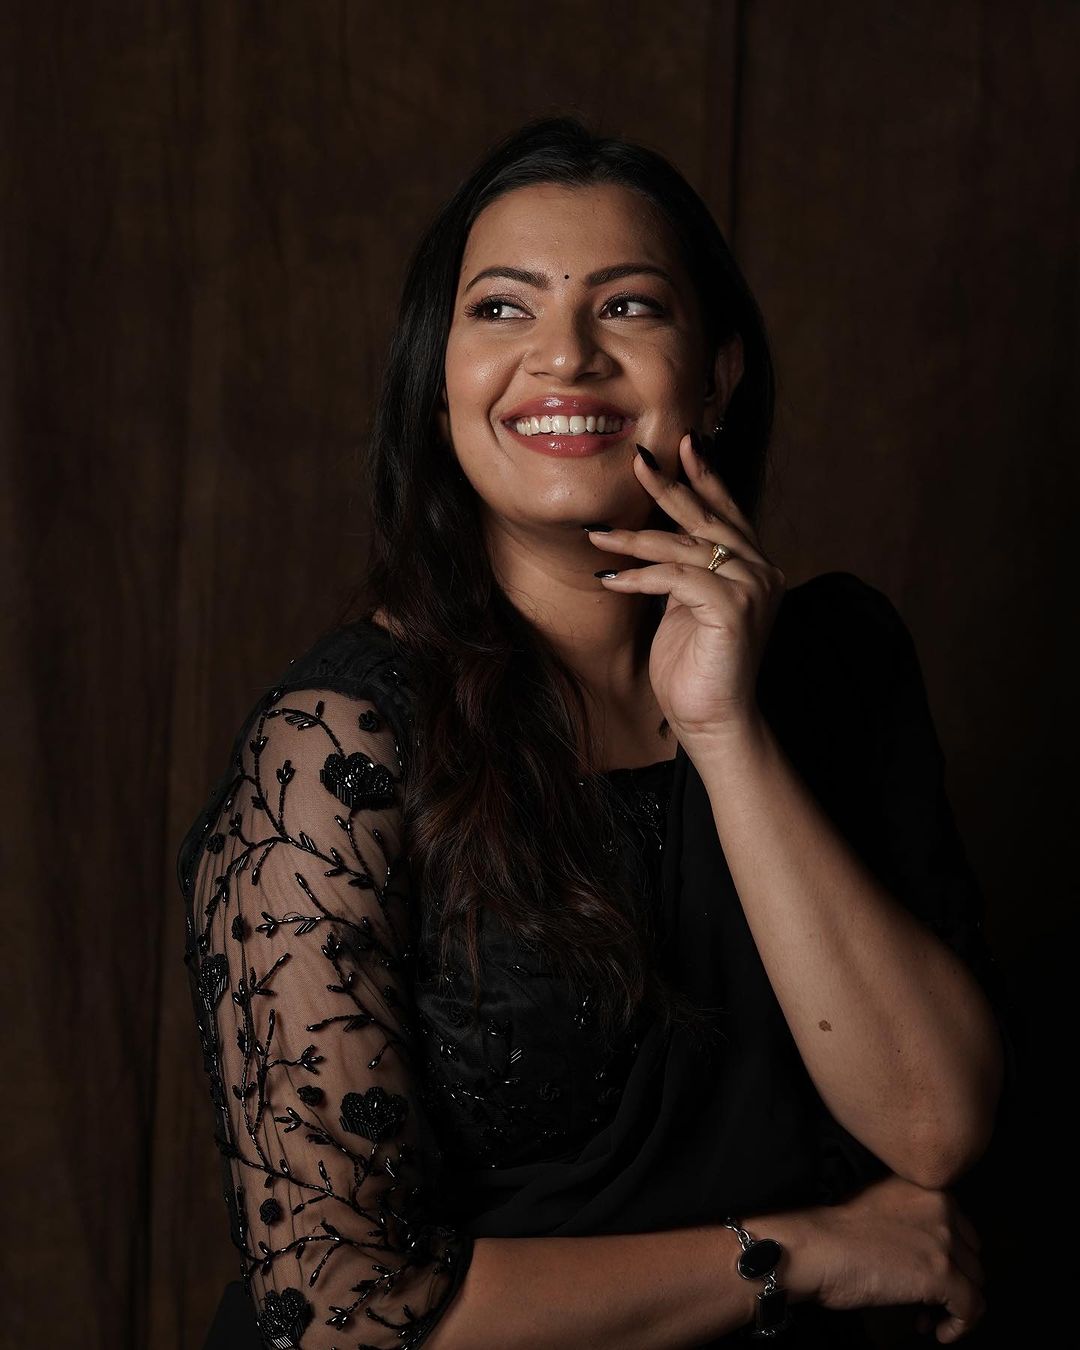 Singer geetha madhuri looks stunning in black saree-Geetha Madhuri, Geethamadhuri Photos,Spicy Hot Pics,Images,High Resolution WallPapers Download